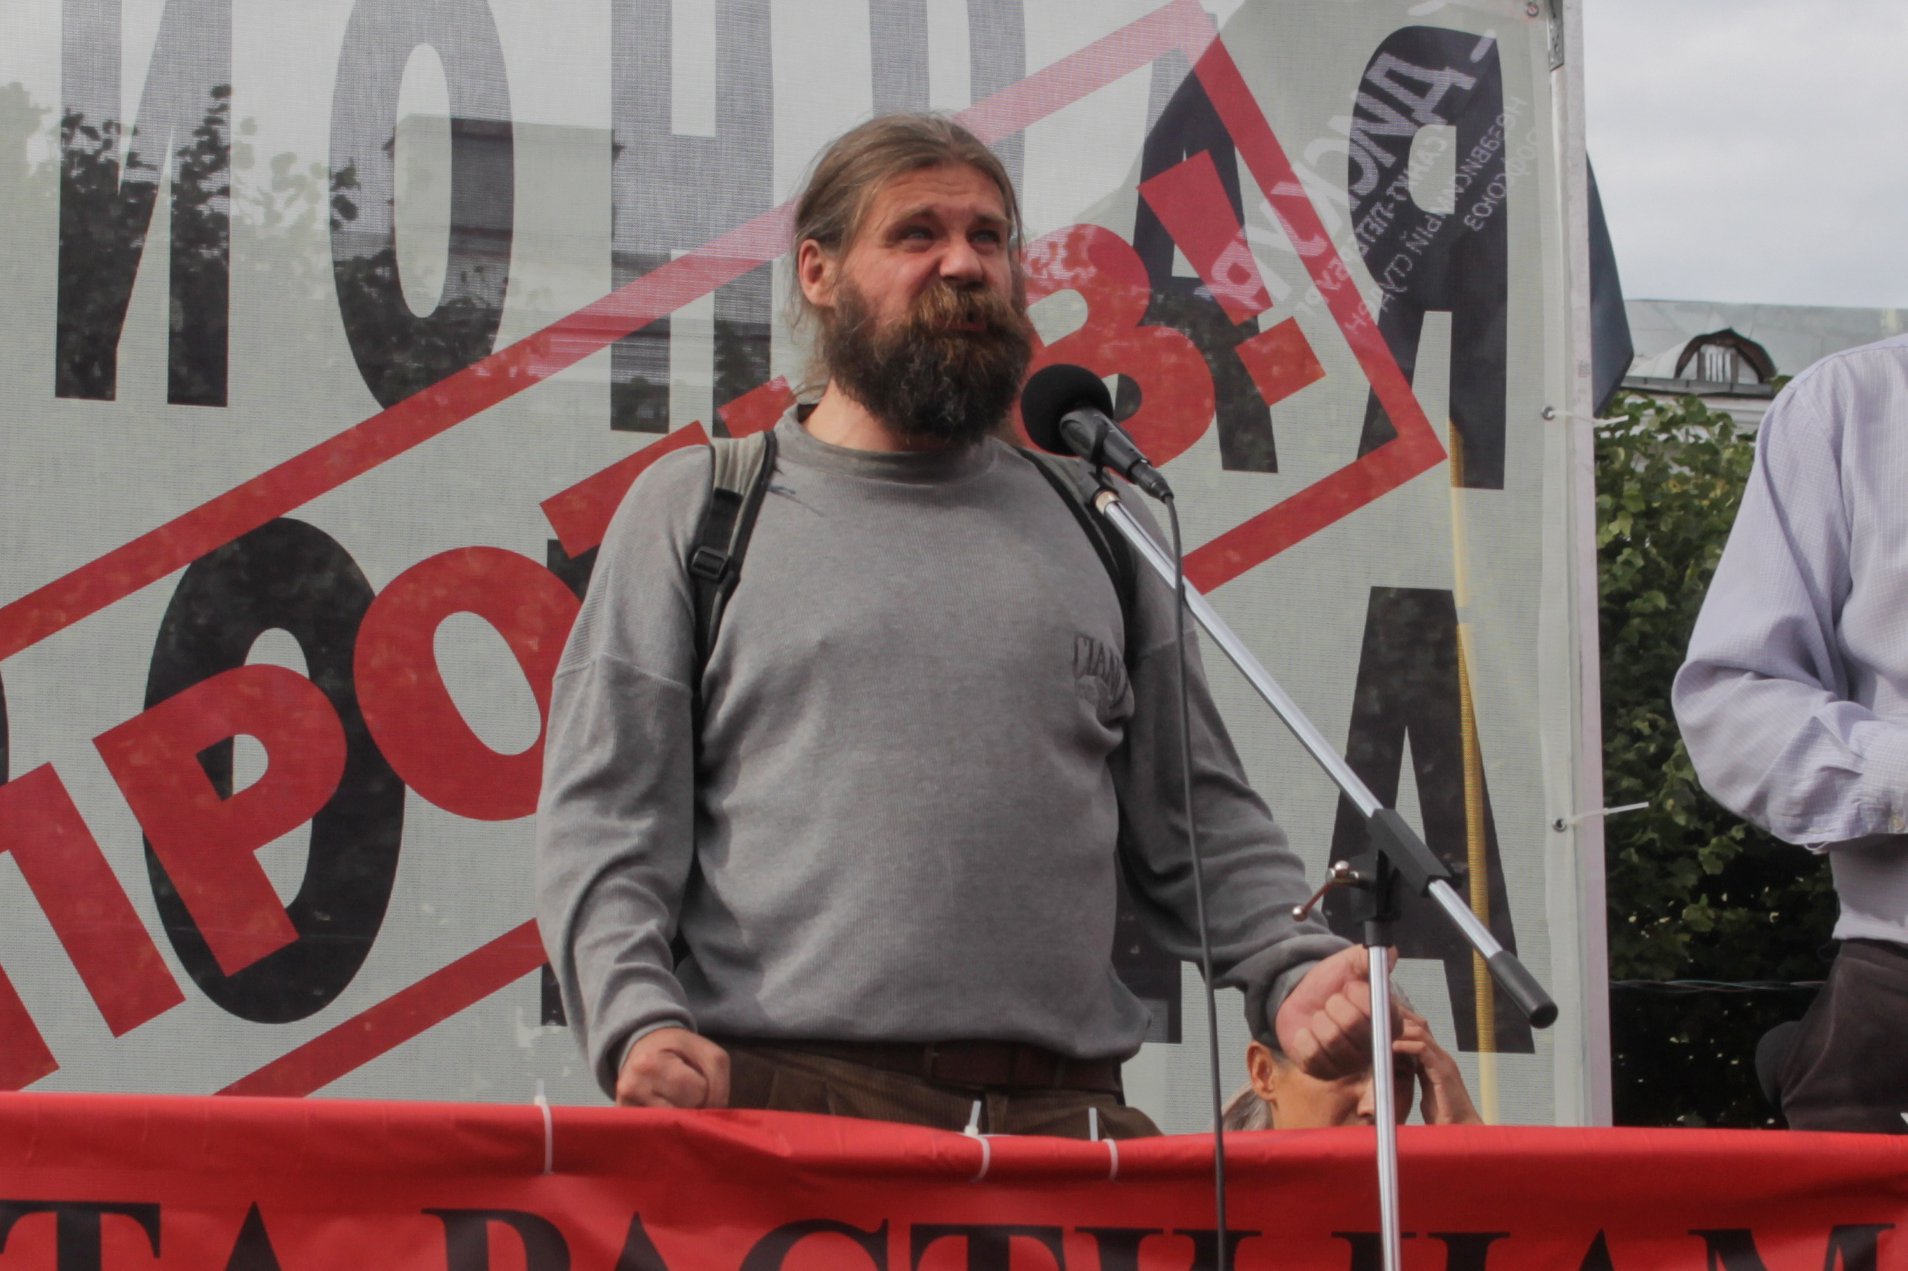 Comrade speaking at pension rally Image own work